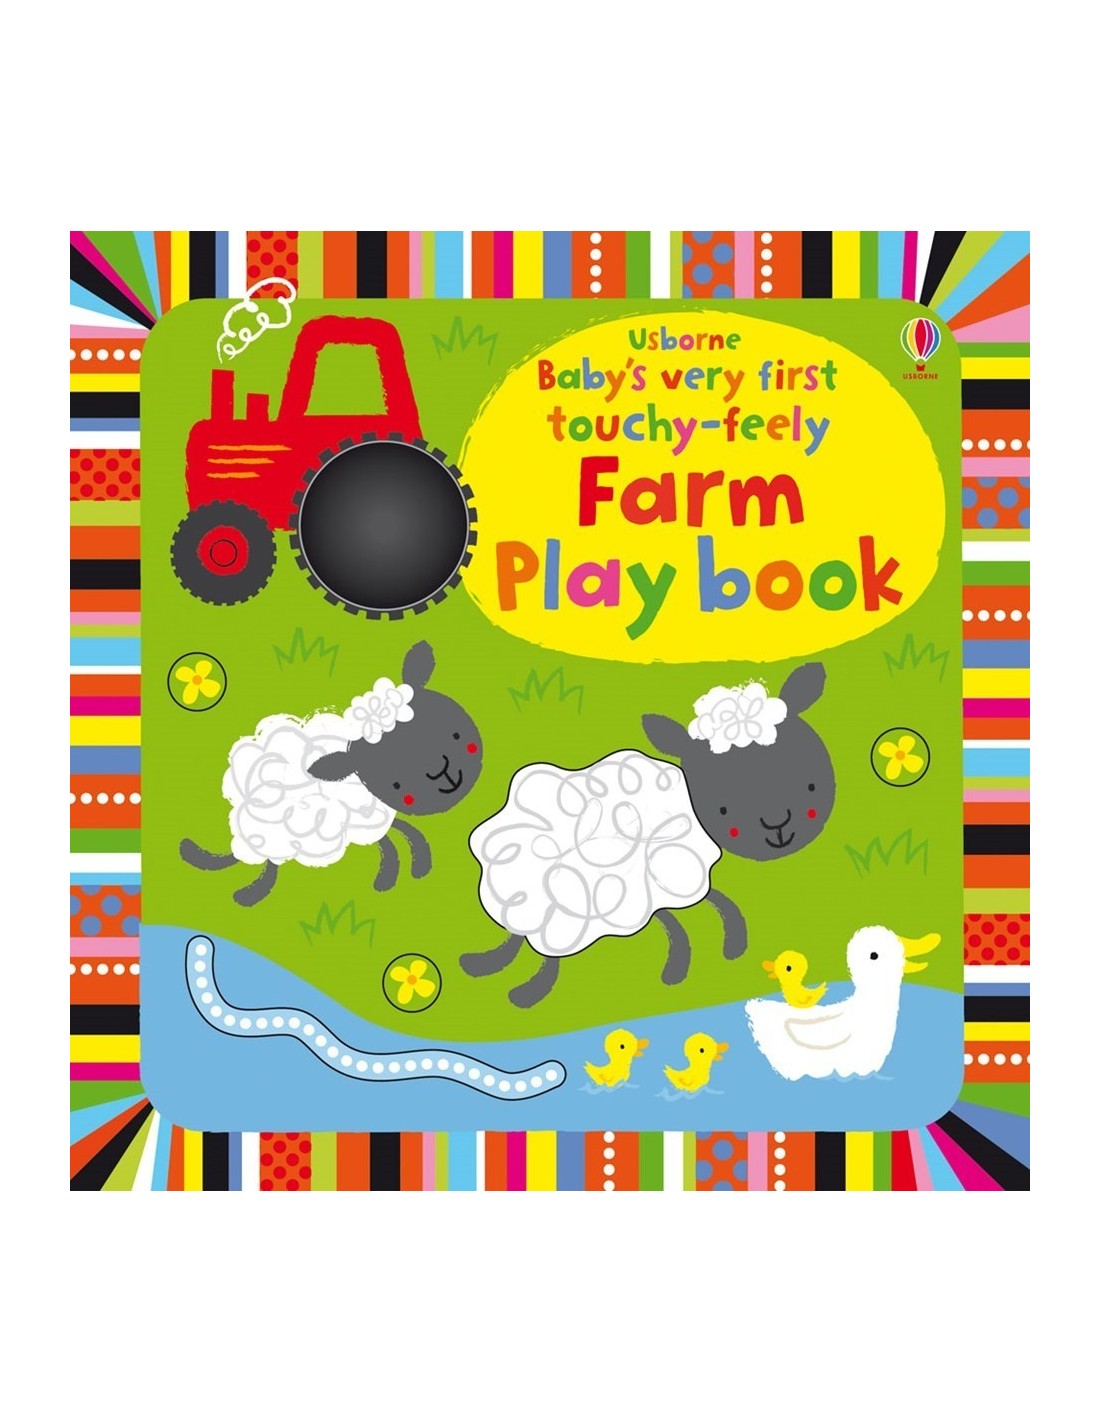 Baby's very first touchy-feely farm play book